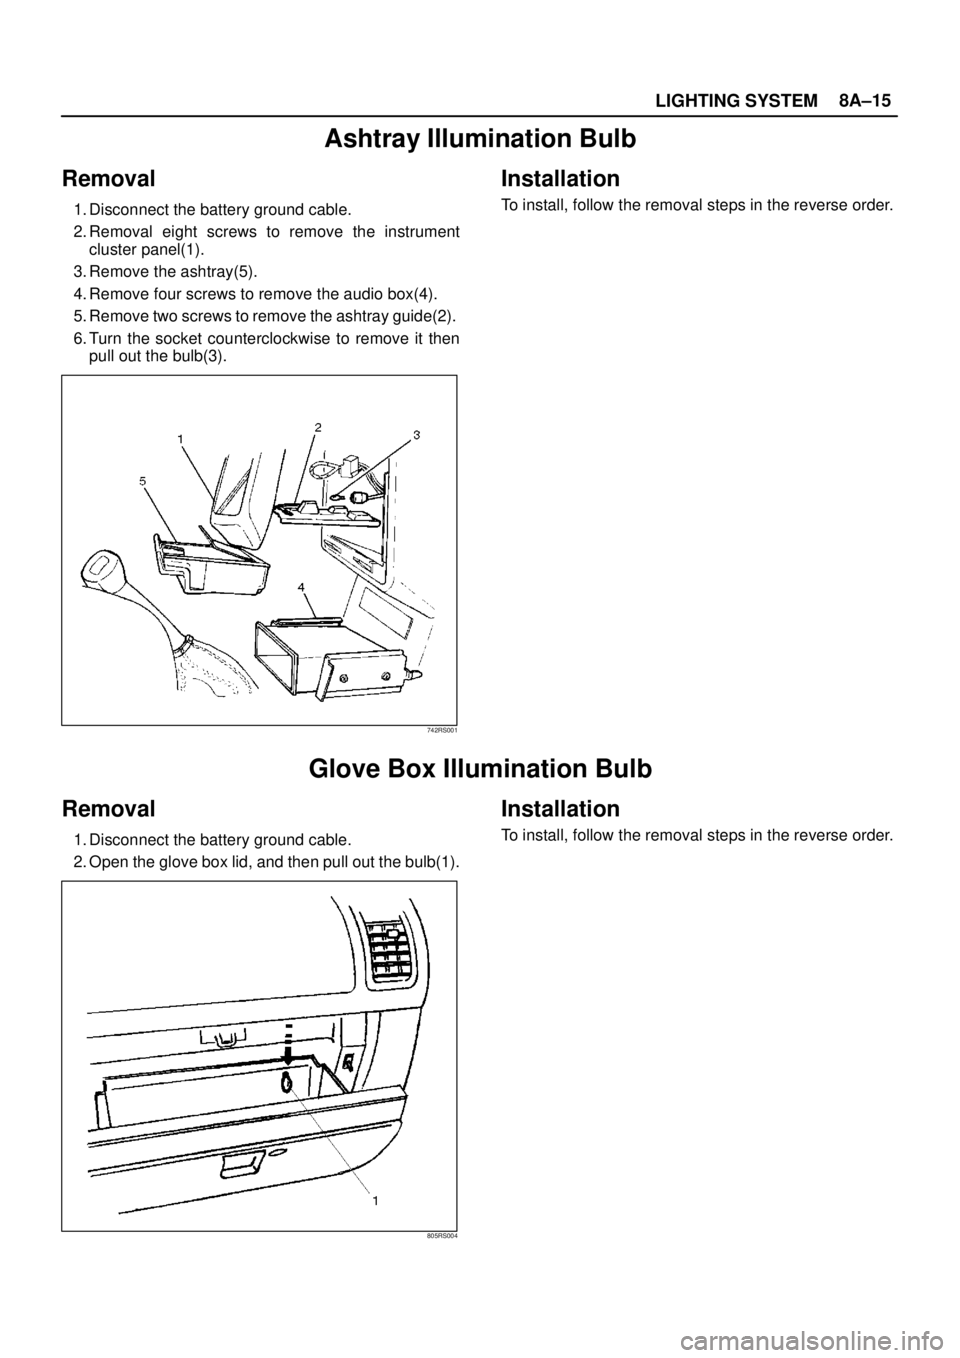 ISUZU TROOPER 1998  Service Repair Manual LIGHTING SYSTEM8A–15
Ashtray Illumination Bulb
Removal
1. Disconnect the battery ground cable. 
2. Removal eight screws to remove the instrument
cluster panel(1). 
3. Remove the ashtray(5). 
4. Remo